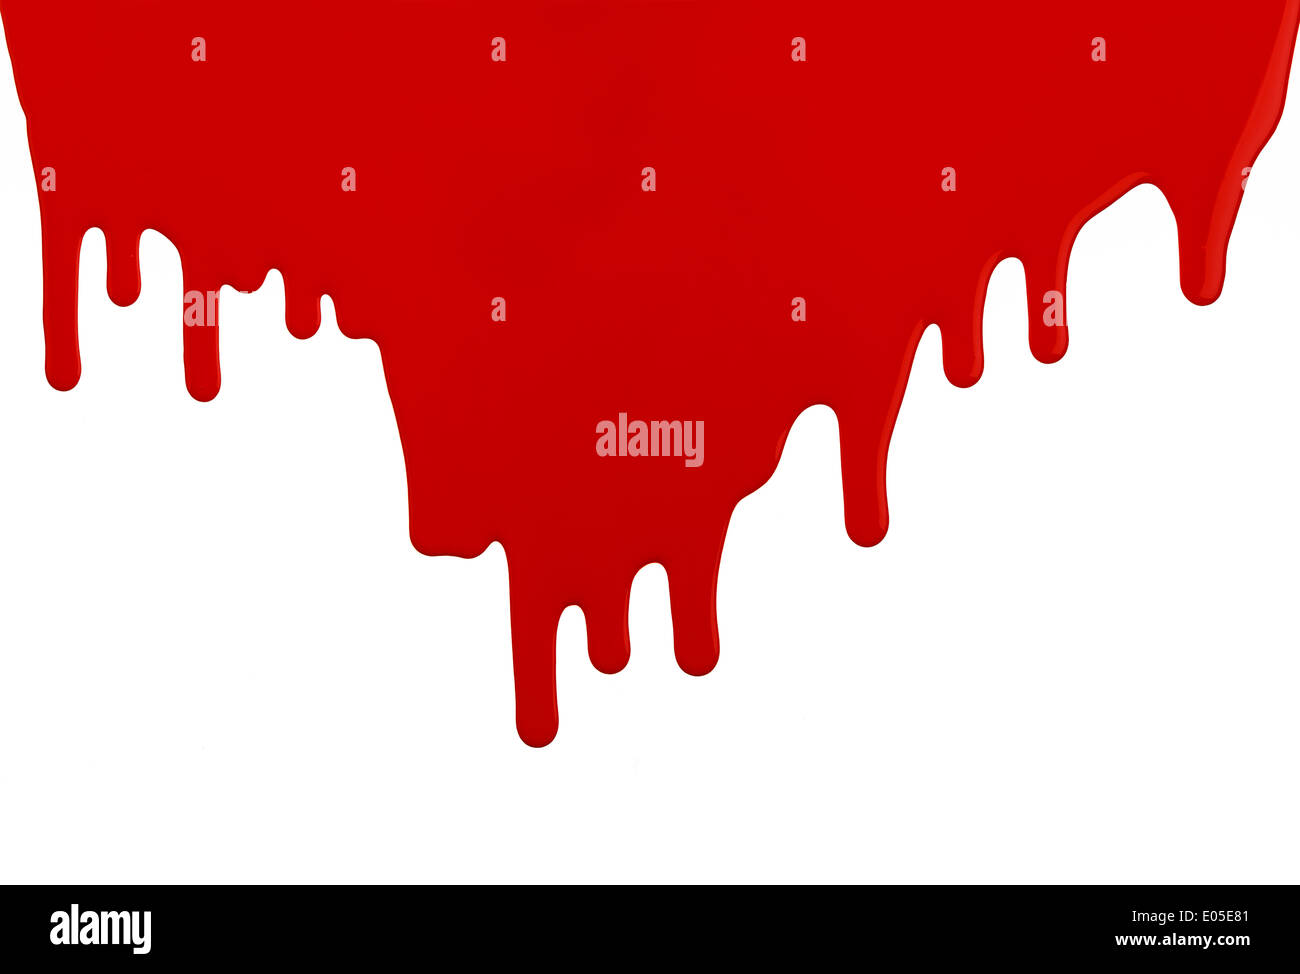 Red Latex Paint Running Dripping Down Wall with Copy Space on White Background. Stock Photo